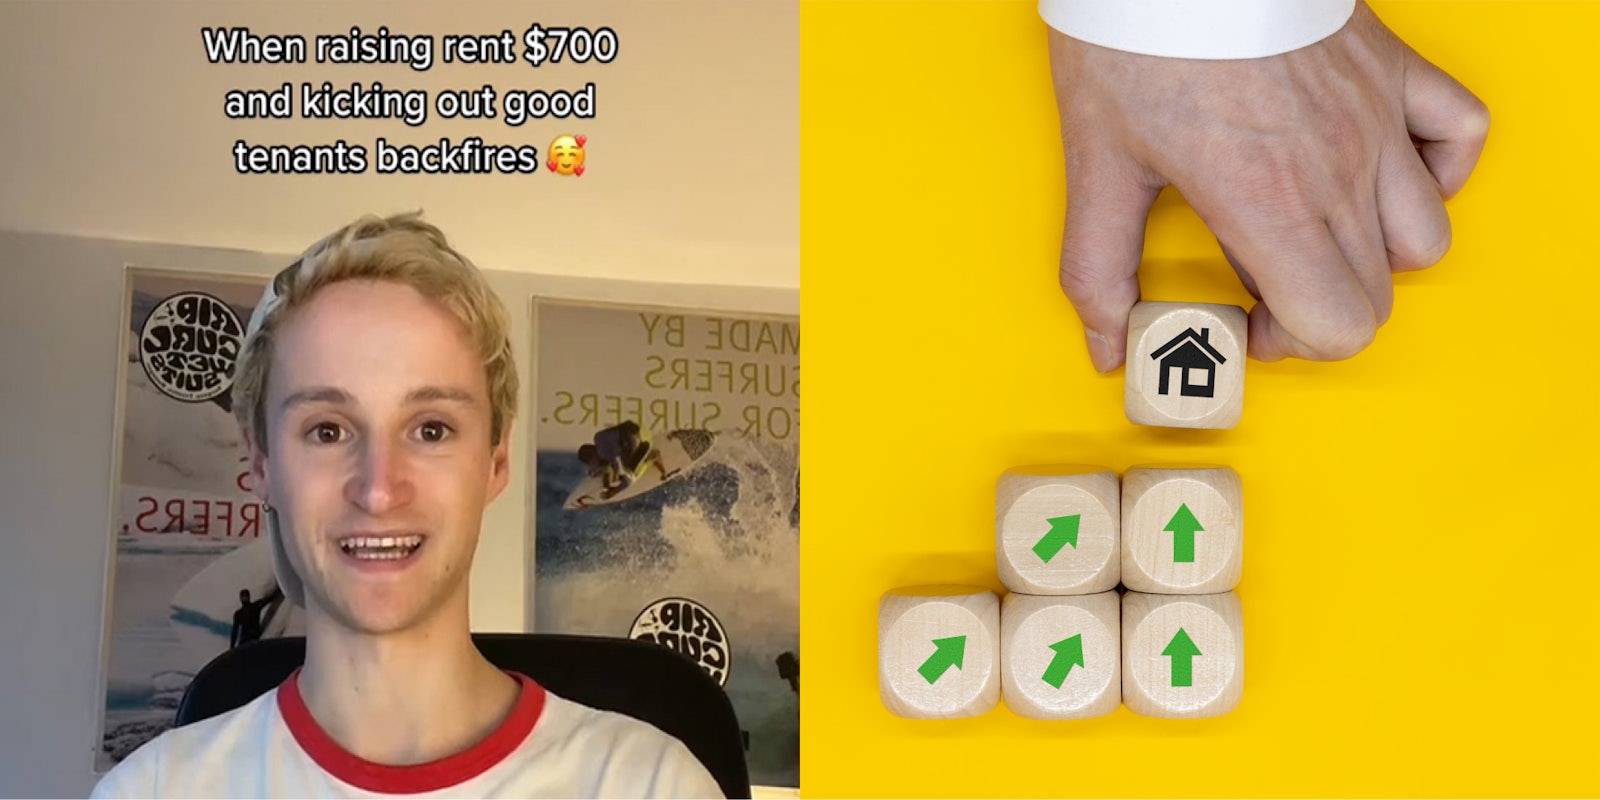 person speaking in front of posters and white wall with caption 'When raising rent $700 and kicking out good tenants backfires' (l) hand with house block above green arrow wooden blocks on yellow background rent increase concept (r)